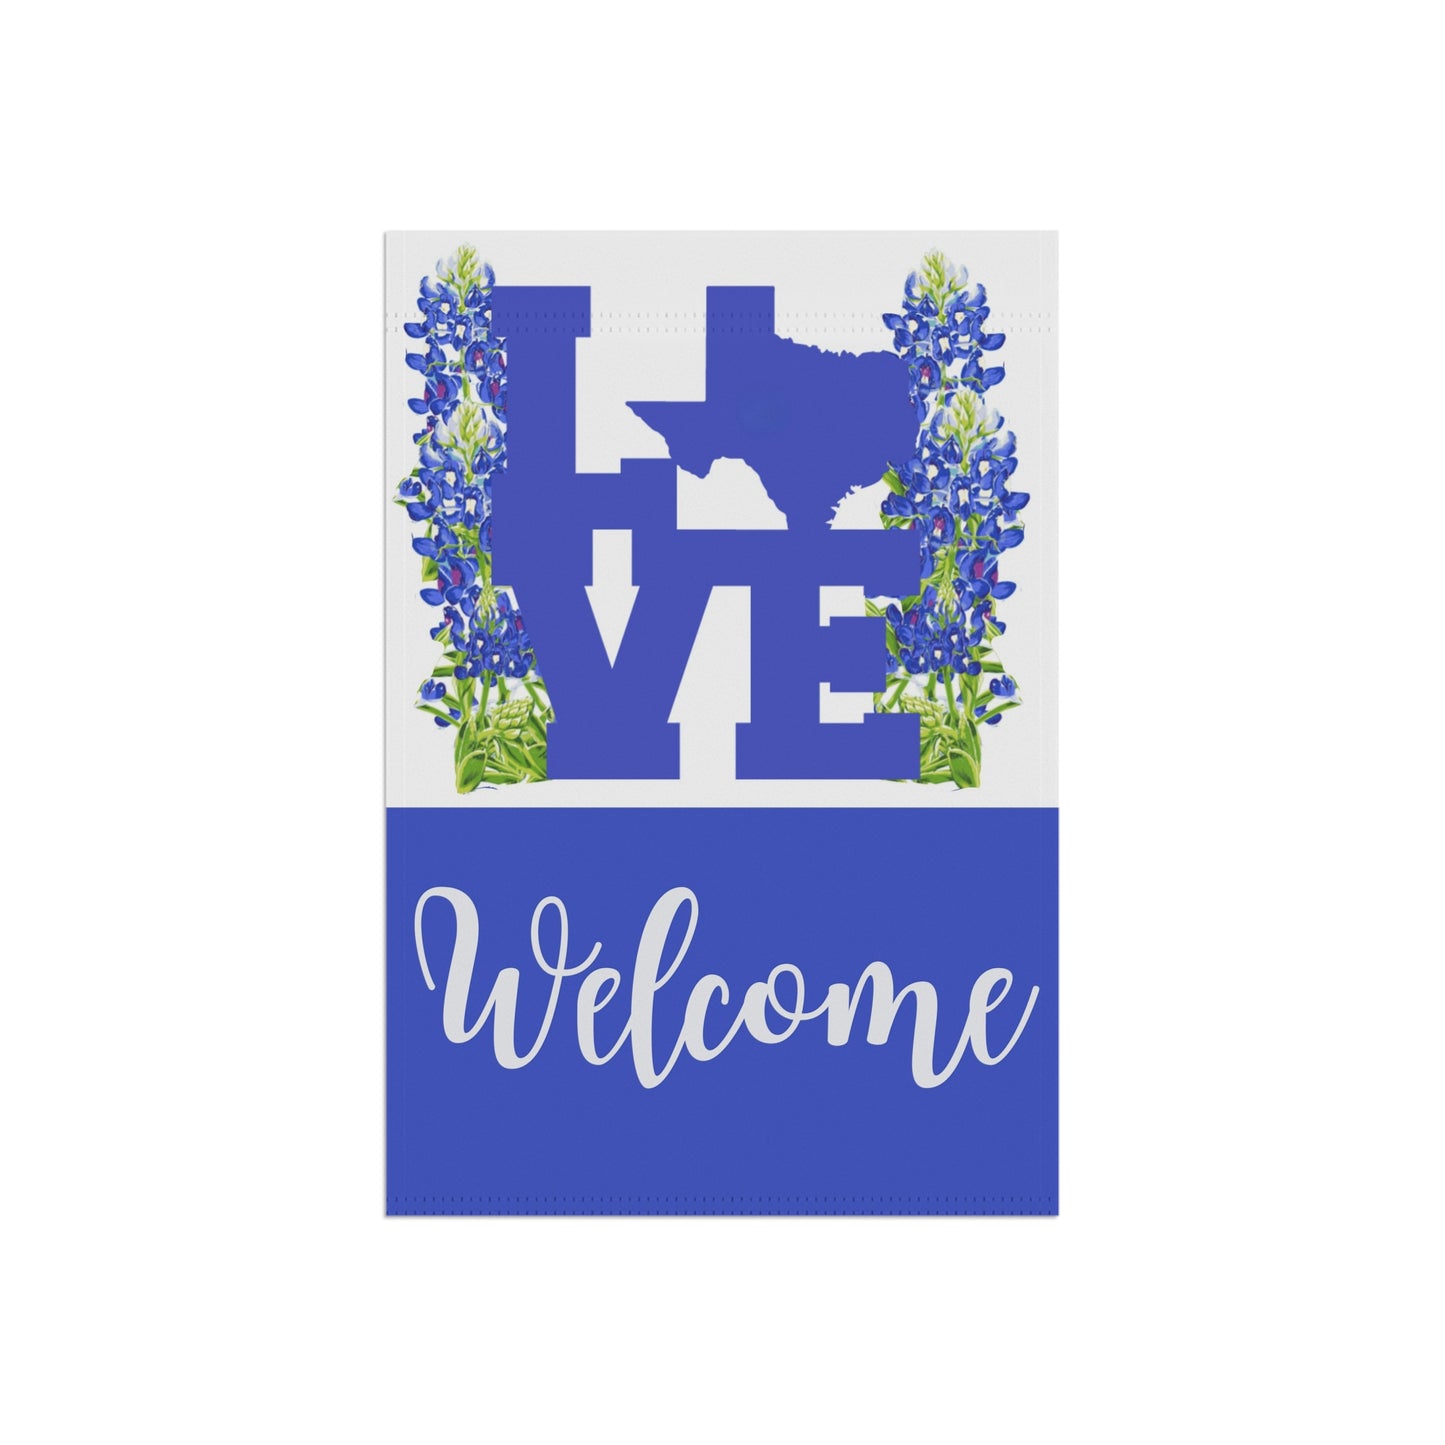 Love Texas Welcome Garden Flag With Bluebonnets